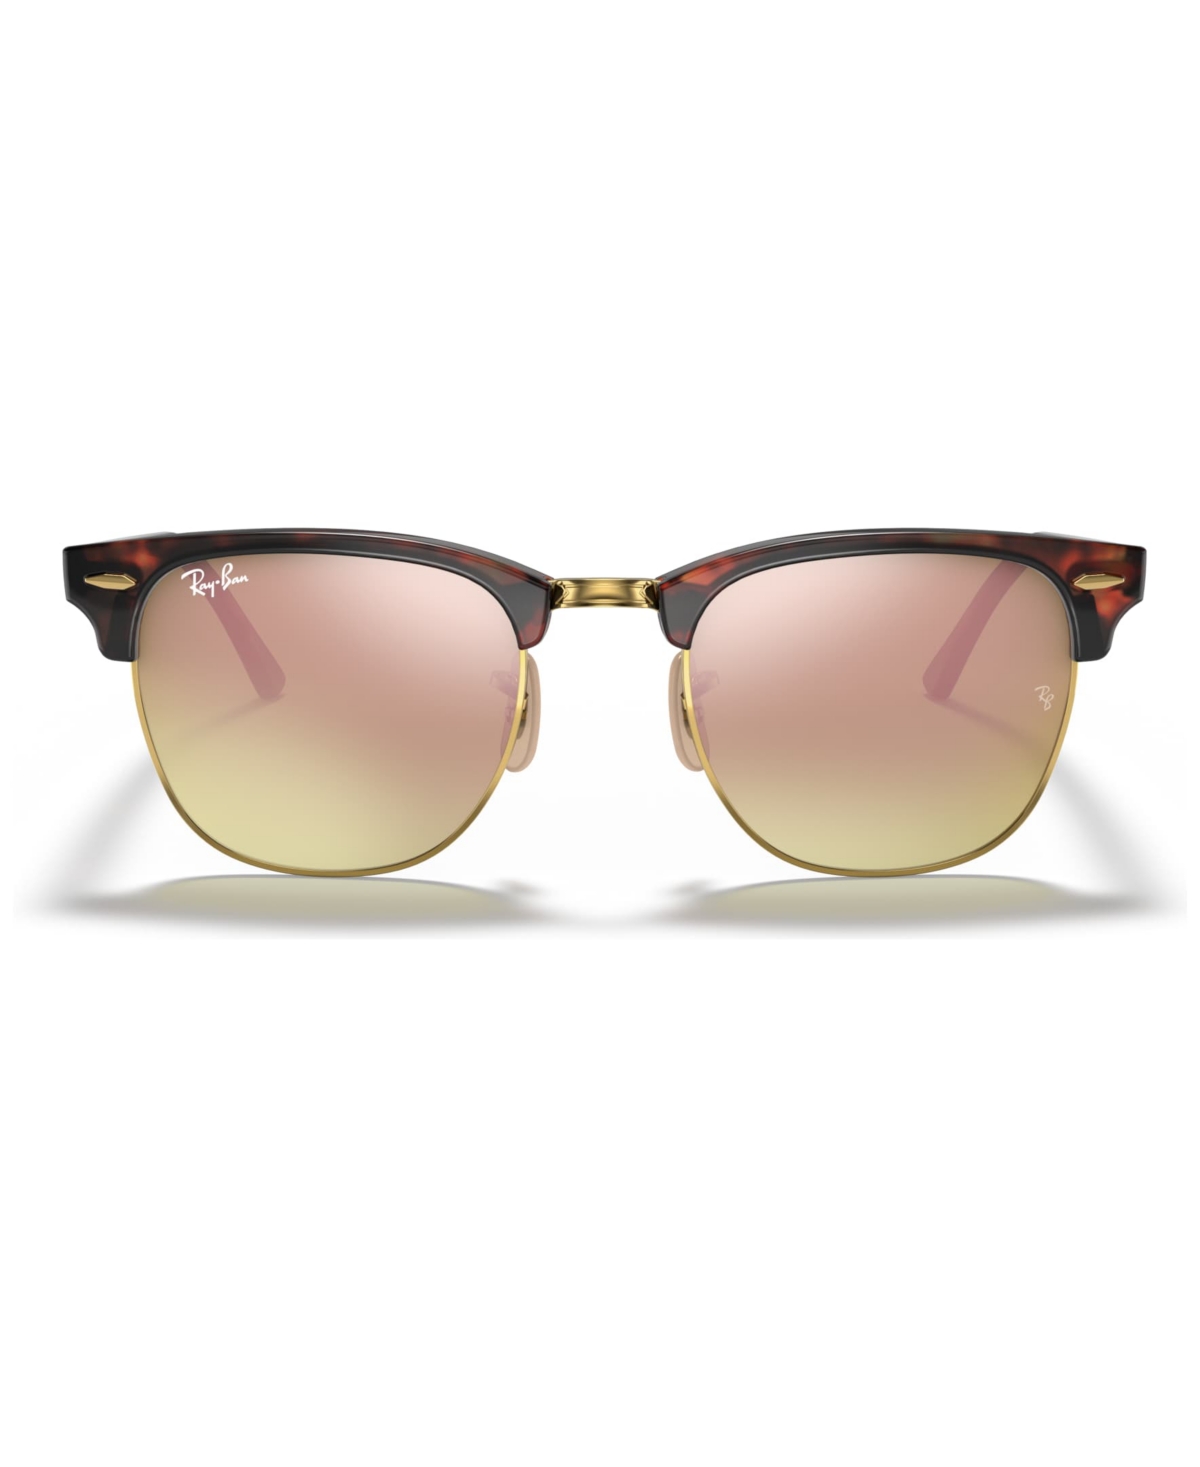 RAY BAN SUNGLASSES, RB3016 CLUBMASTER FLAT LENSES GRADIENT